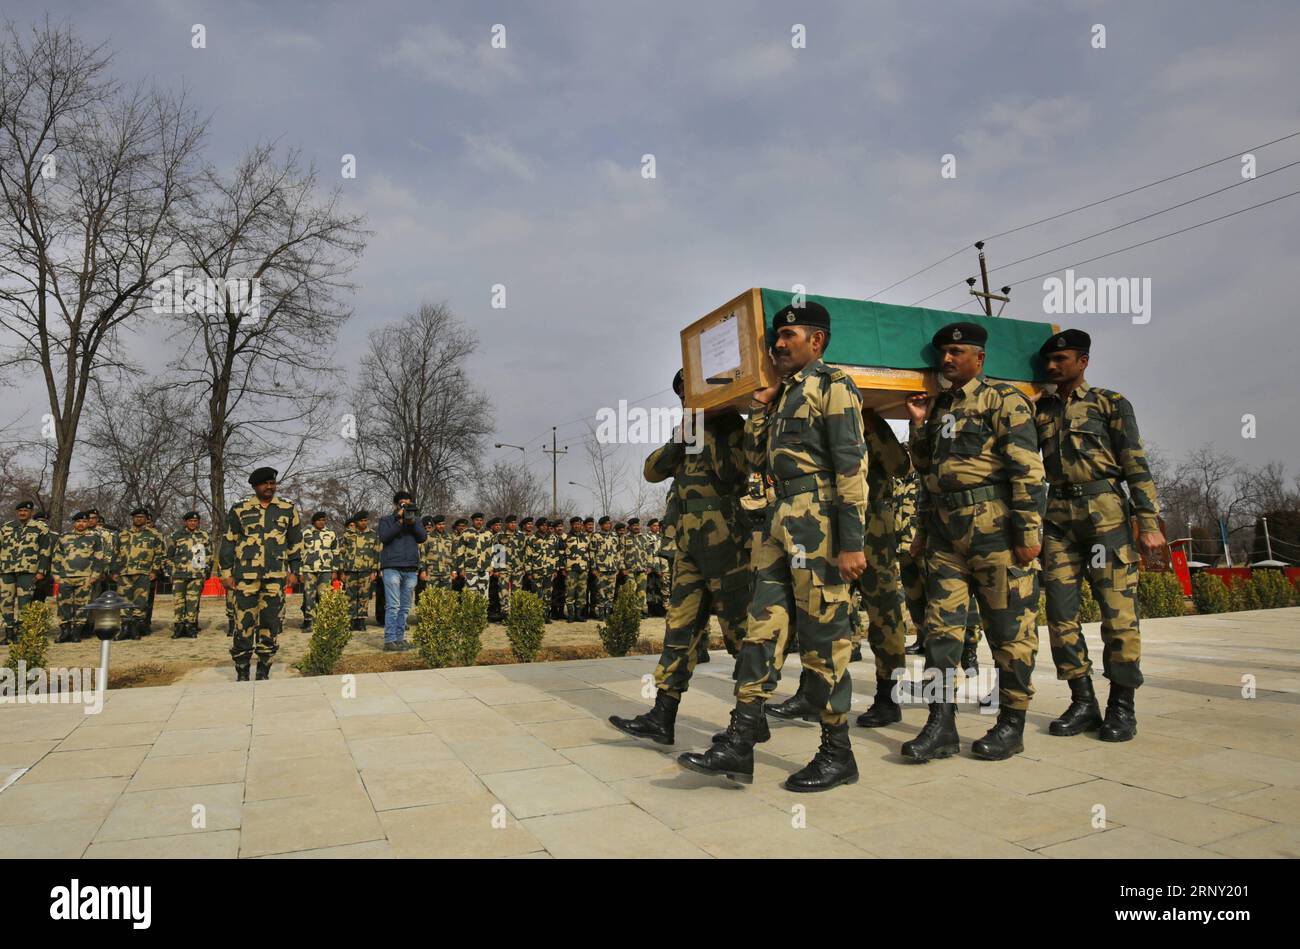 (180222) -- SRINAGAR, Feb. 22, 2018 -- Border guards of India s Border Security Force (BSF) carry the coffin of their colleague during his wreath laying ceremony at their base camp in outskirts of Srinagar city, the summer capital of Indian-controlled Kashmir, Feb. 22, 2018. A border guard of India s BSF has been killed in firing at Tanghdar sector in frontier Kupwara district on Line of Control (LoC) dividing Kashmir. ) (rh) KASHMIR-SRINAGAR-WREATH LAYING CEREMONY JavedxDar PUBLICATIONxNOTxINxCHN Stock Photo